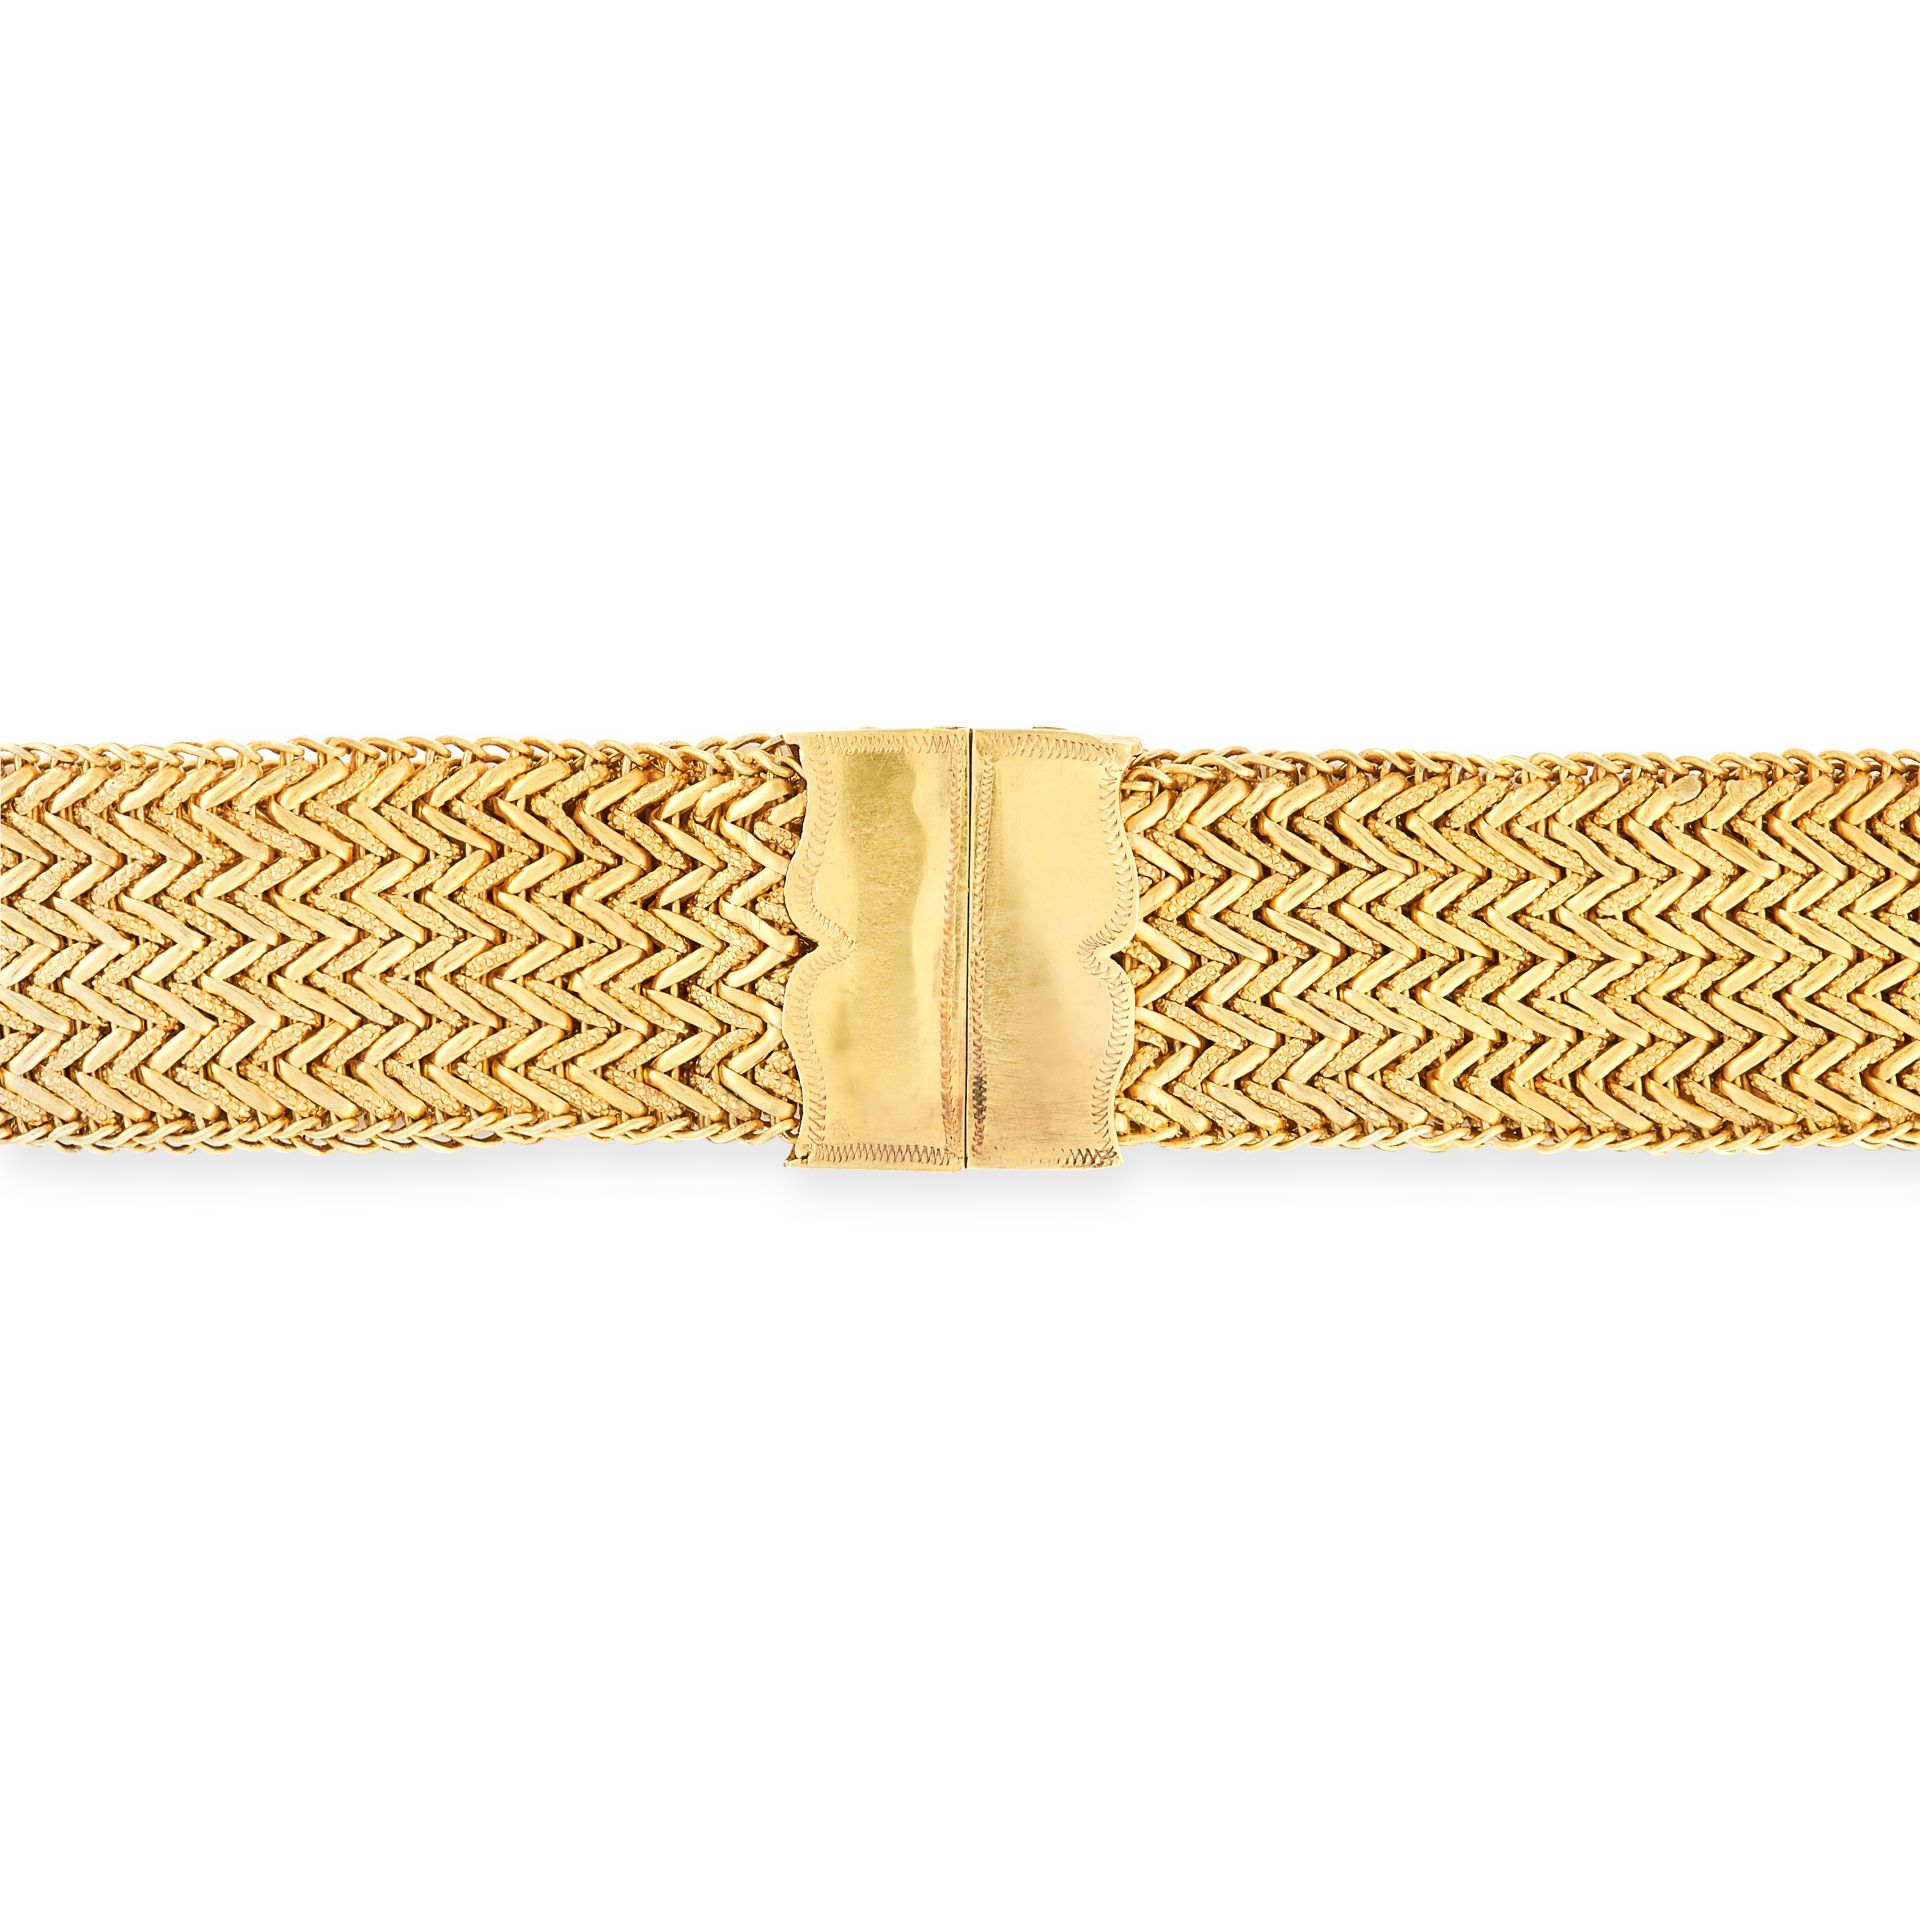 AN ANTIQUE FANCY LINK COLLAR NECKLACE comprising rows of alternating textured and plain